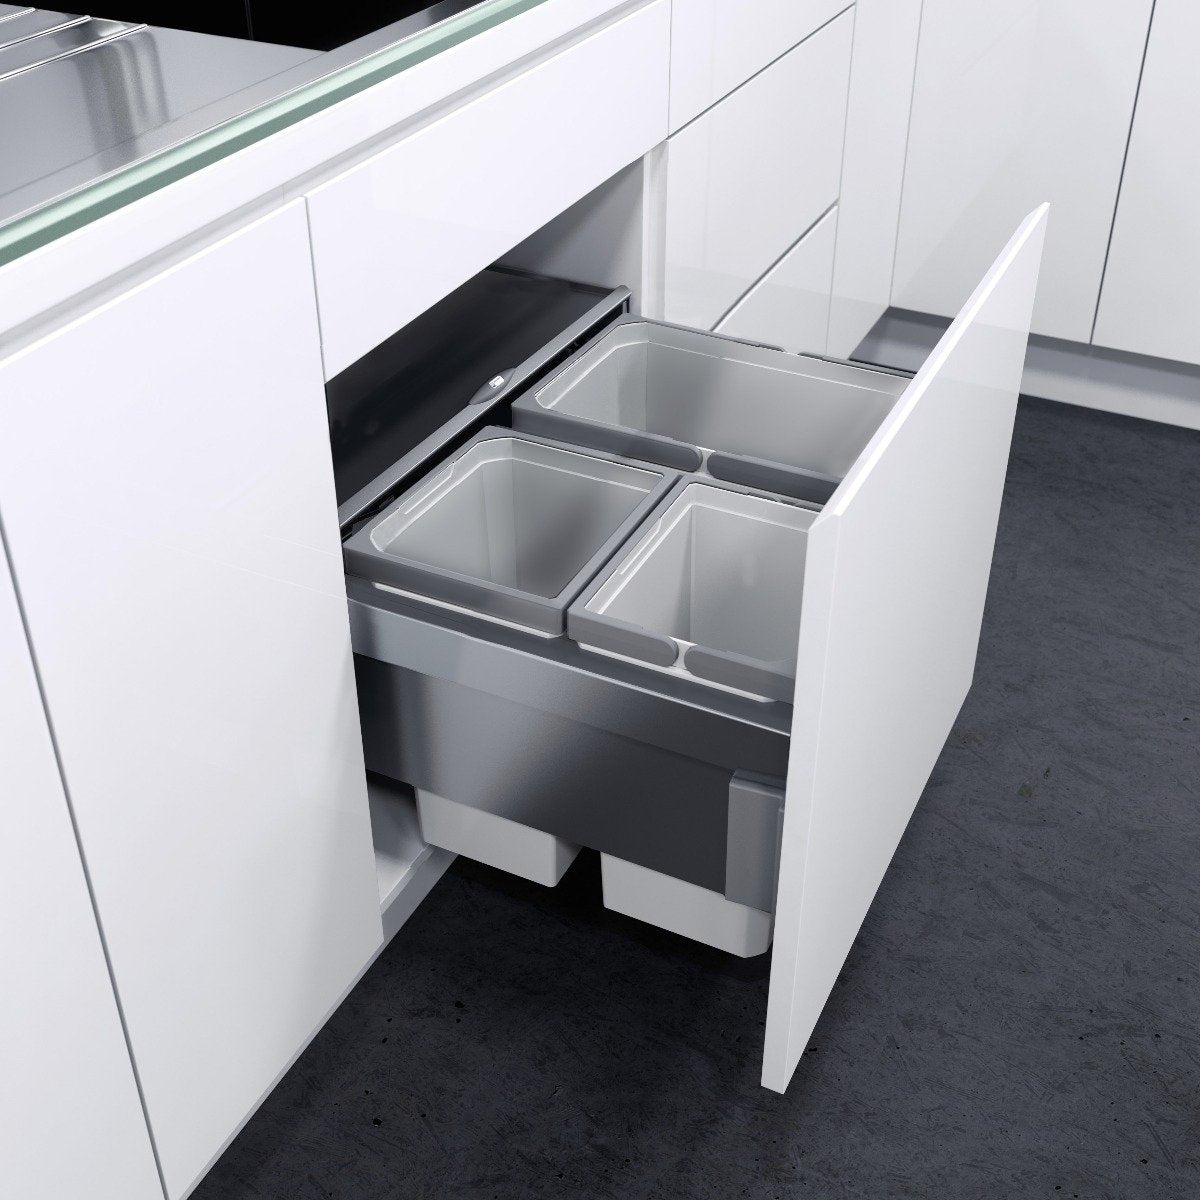 The Vauth-Sagel integrated Recycling Bin is great for separating out waste and recycling